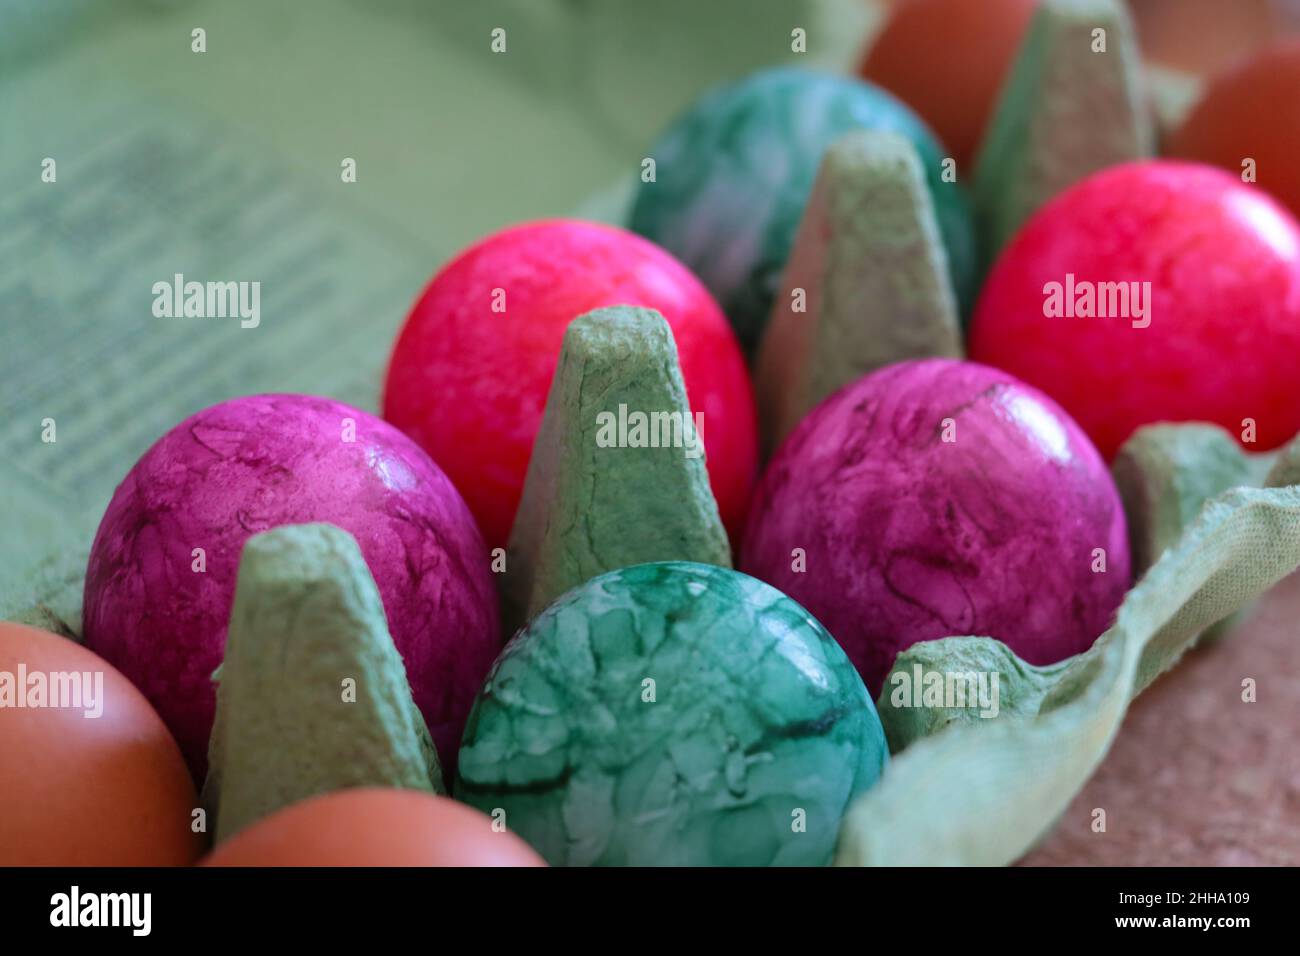 Out of focus. Multi-colored Easter eggs. A bright holiday for believers Stock Photo